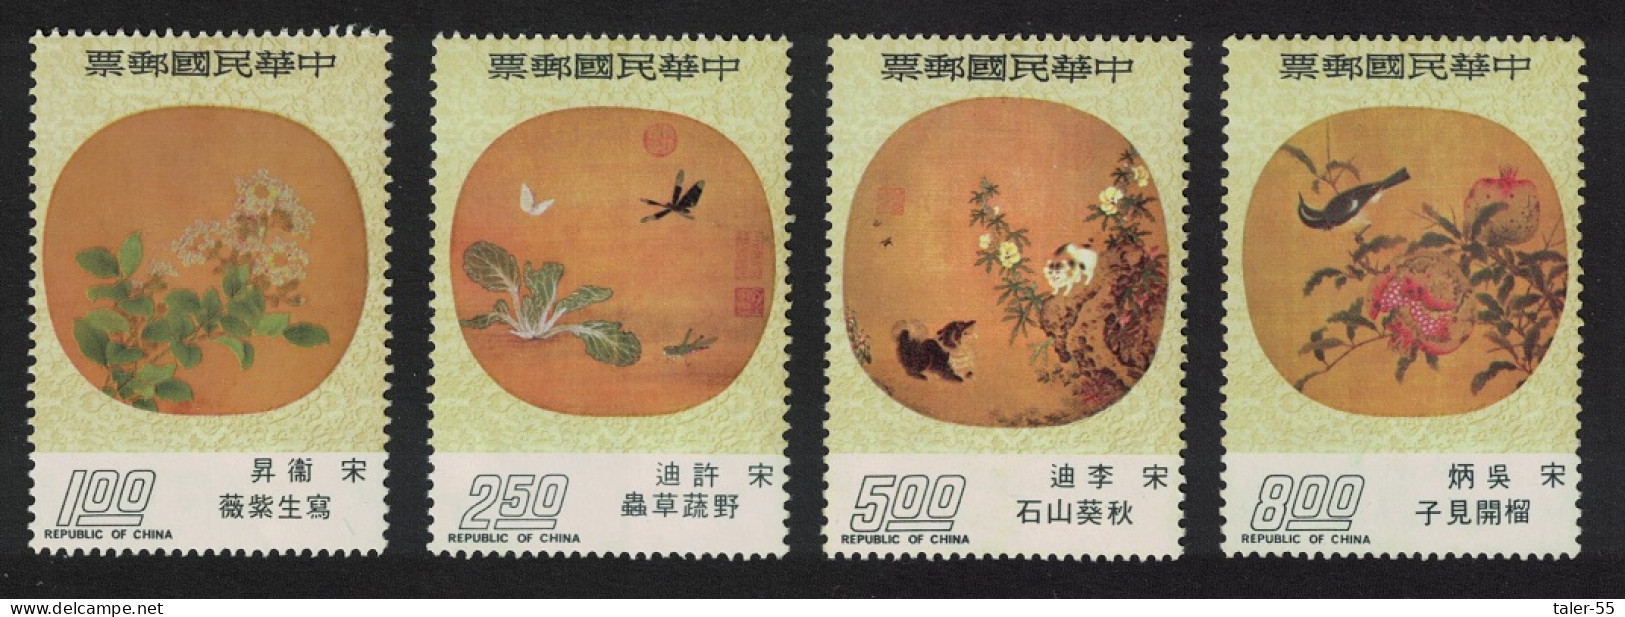 Taiwan Birds Ancient Chinese Moon-shaped Fan-paintings 4v 1974 MNH SG#1008-1011 - Neufs